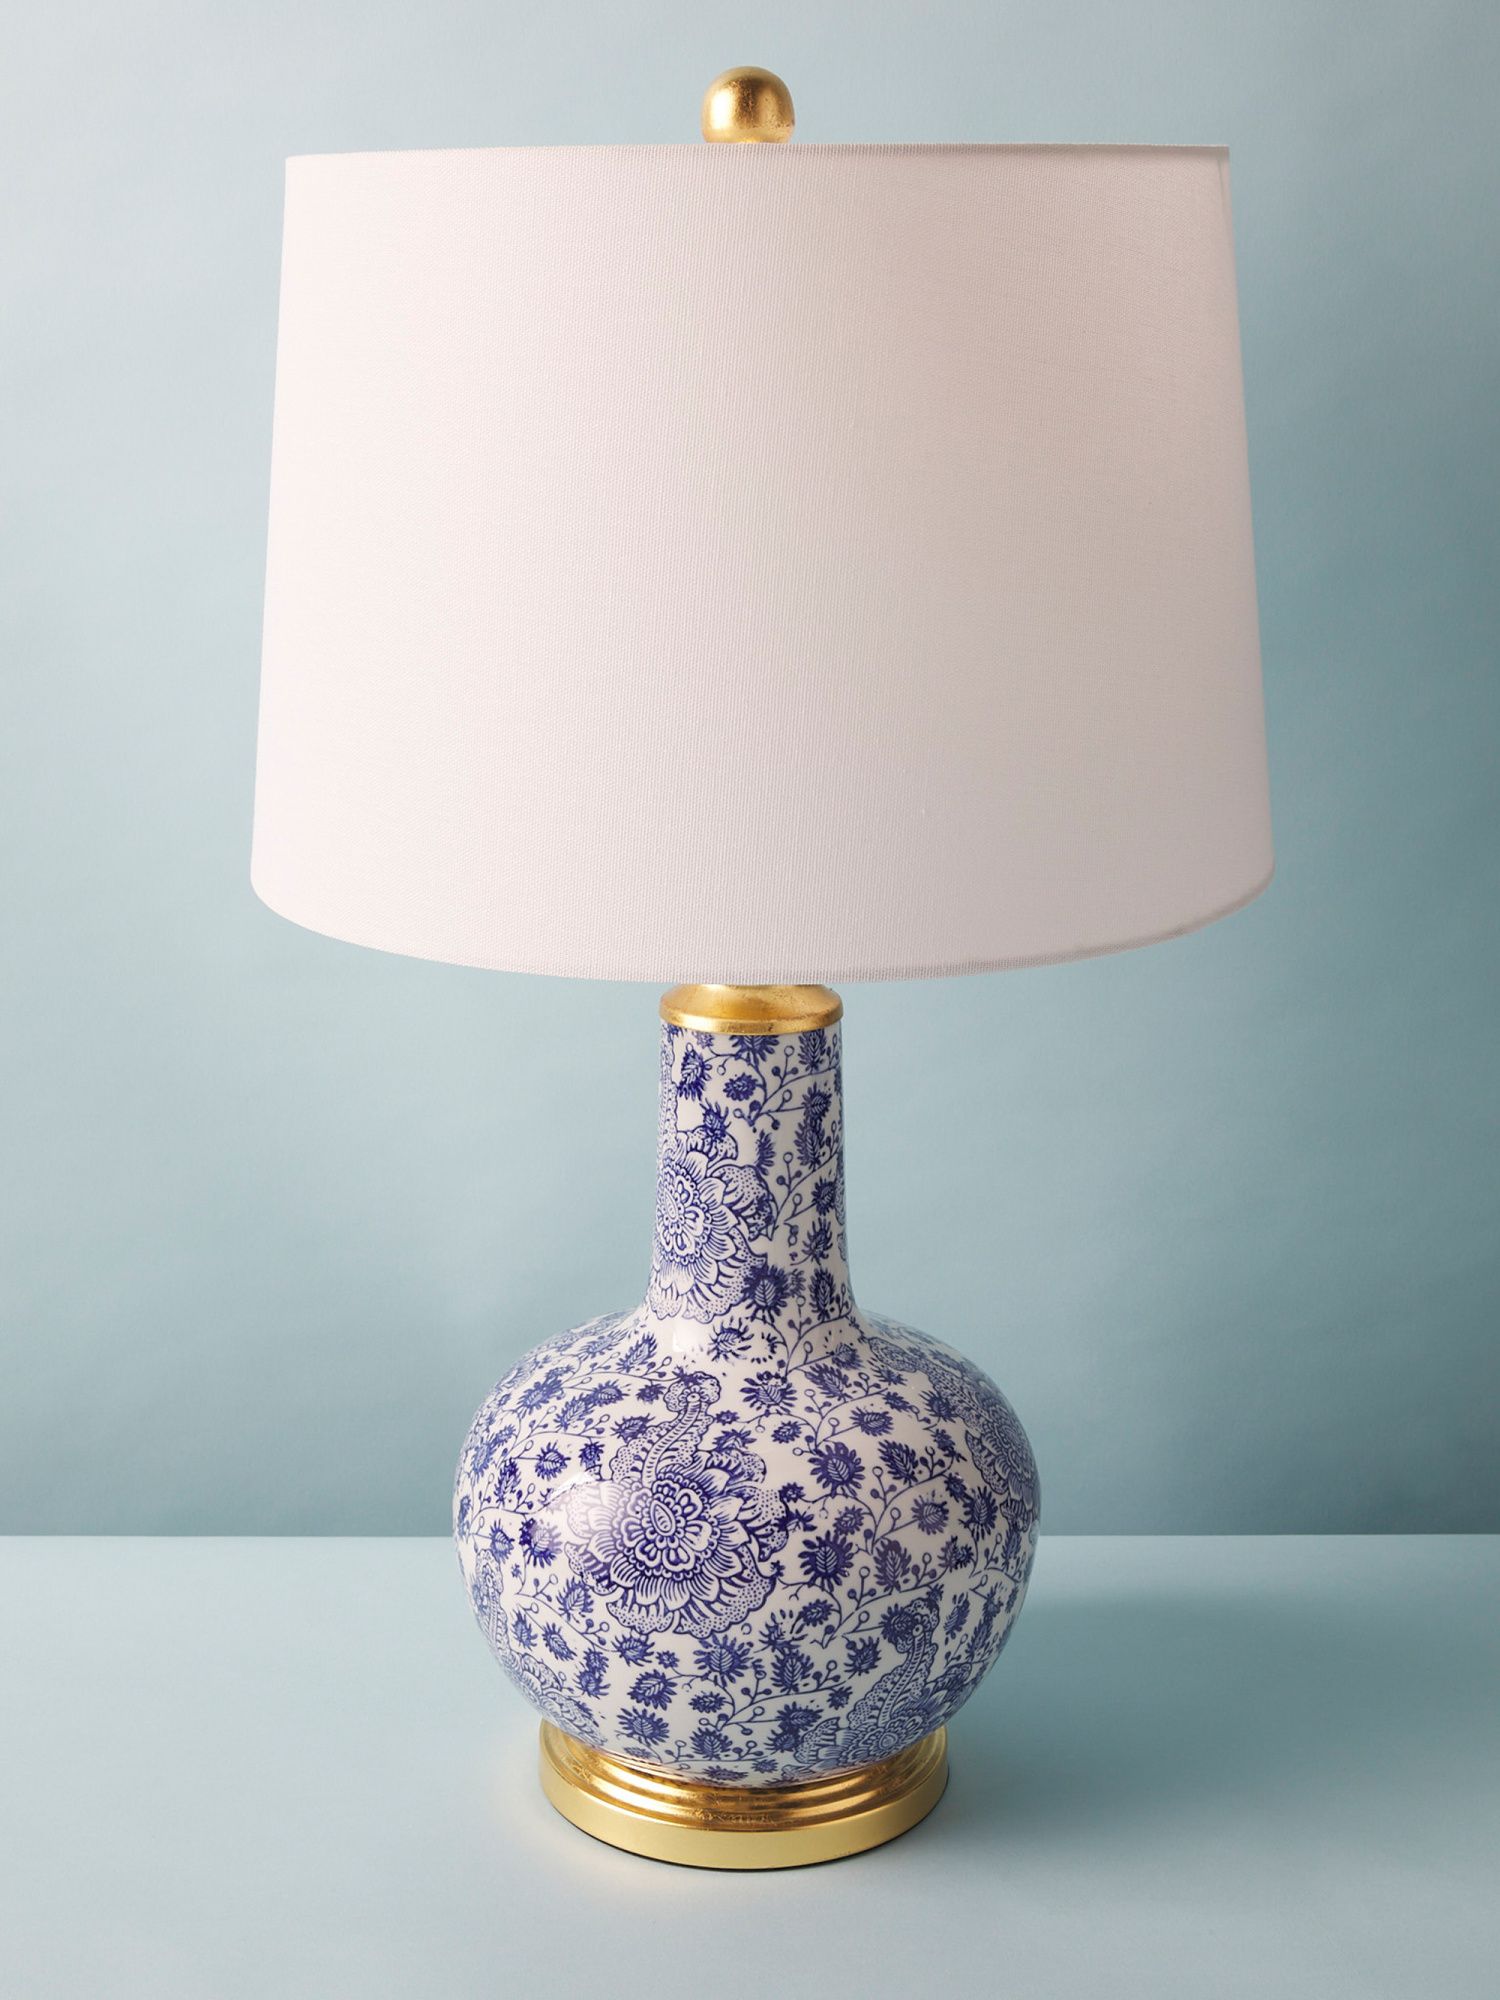 25in Ceramic Leia Table Lamp | Table Lamps | HomeGoods | HomeGoods